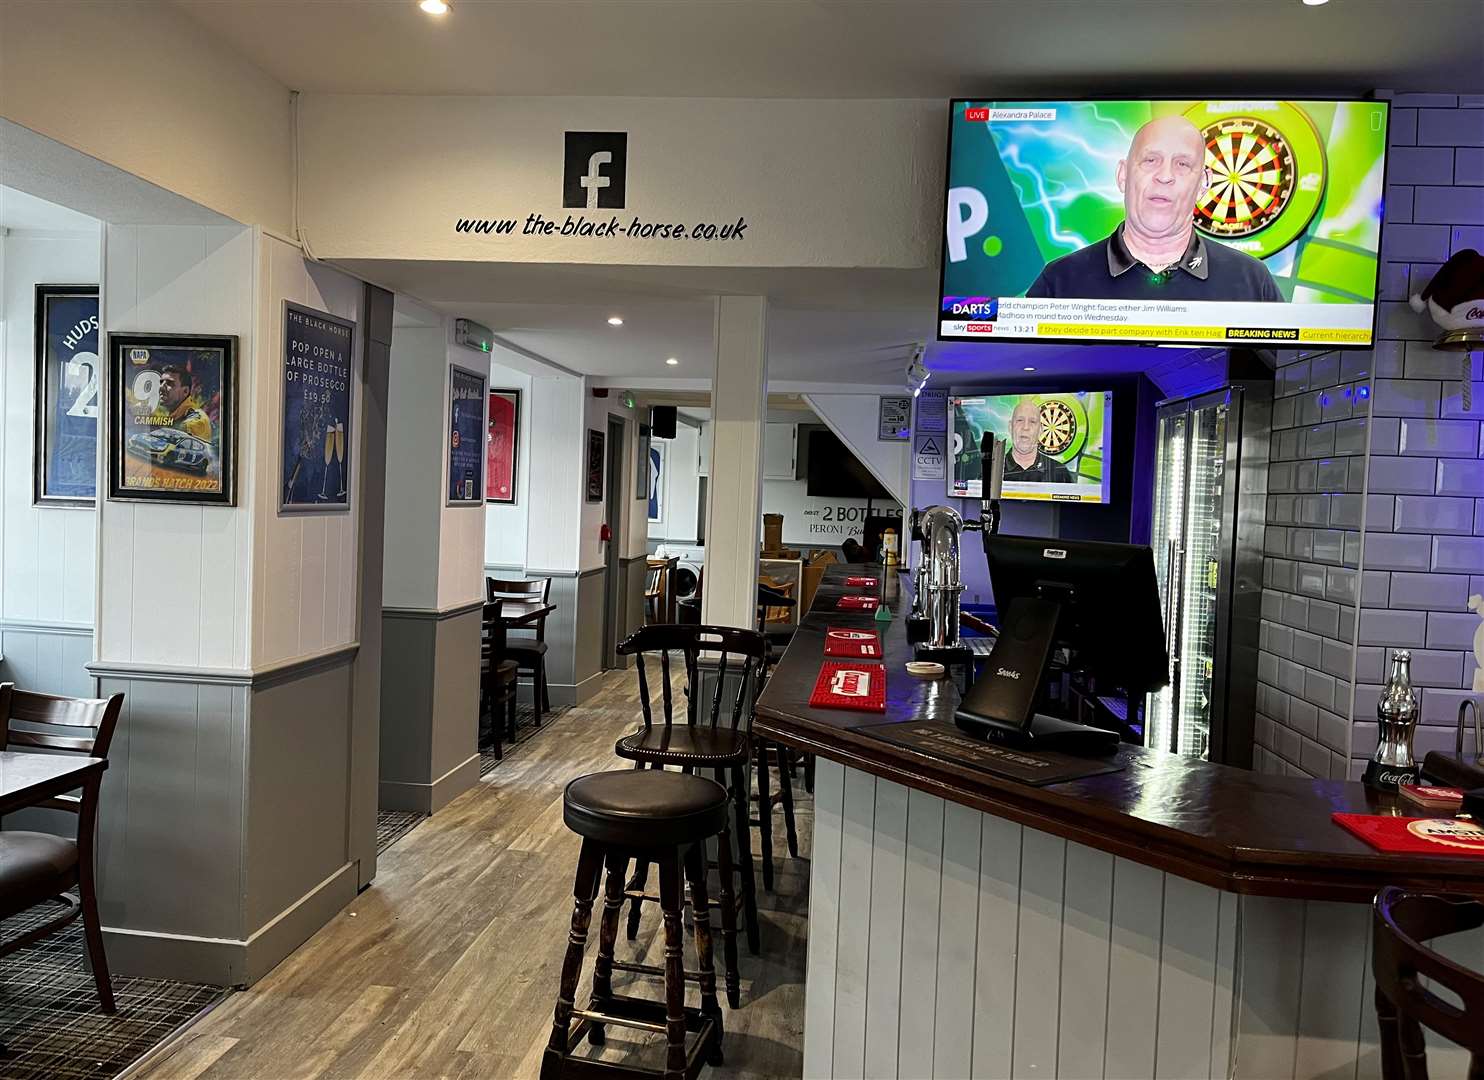 Landlord Kyle Blair has installed Sky Sports in The Black Horse